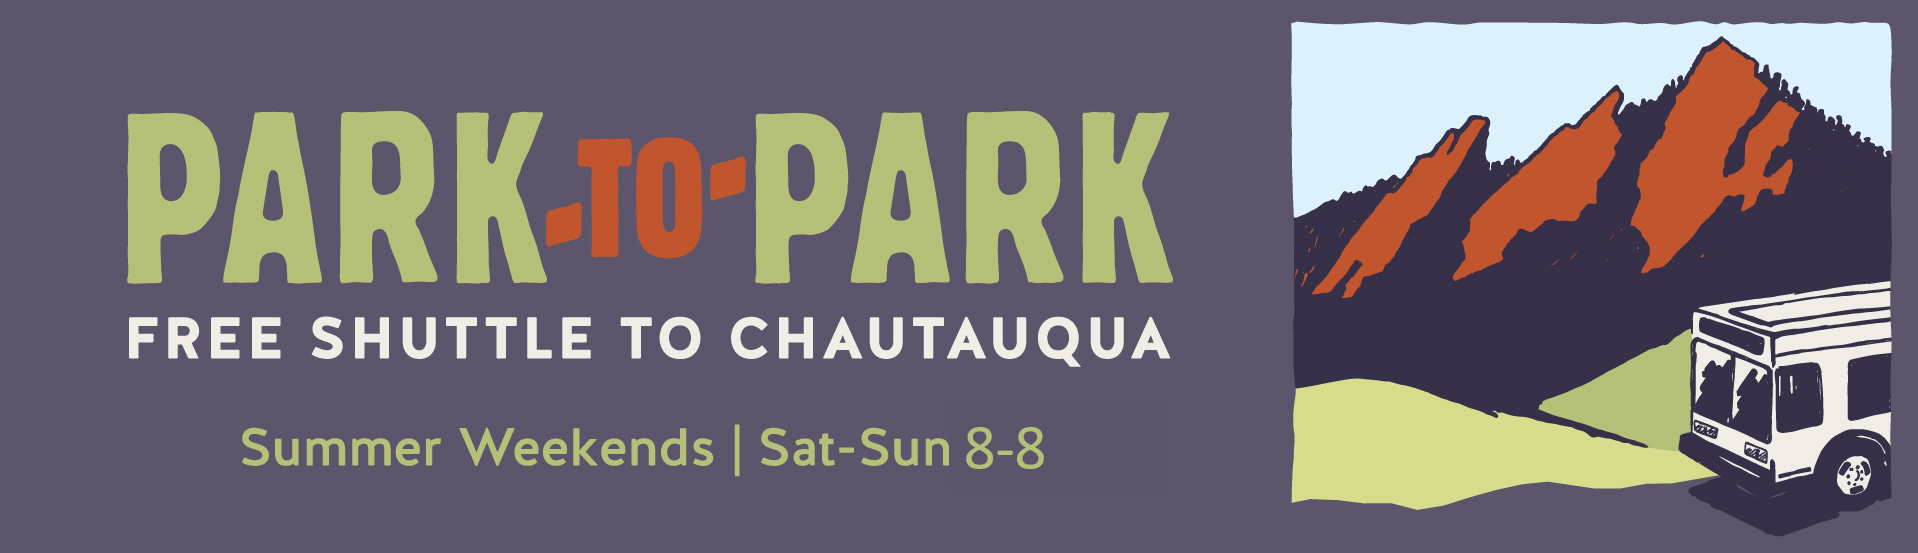 Park-to-Park banner